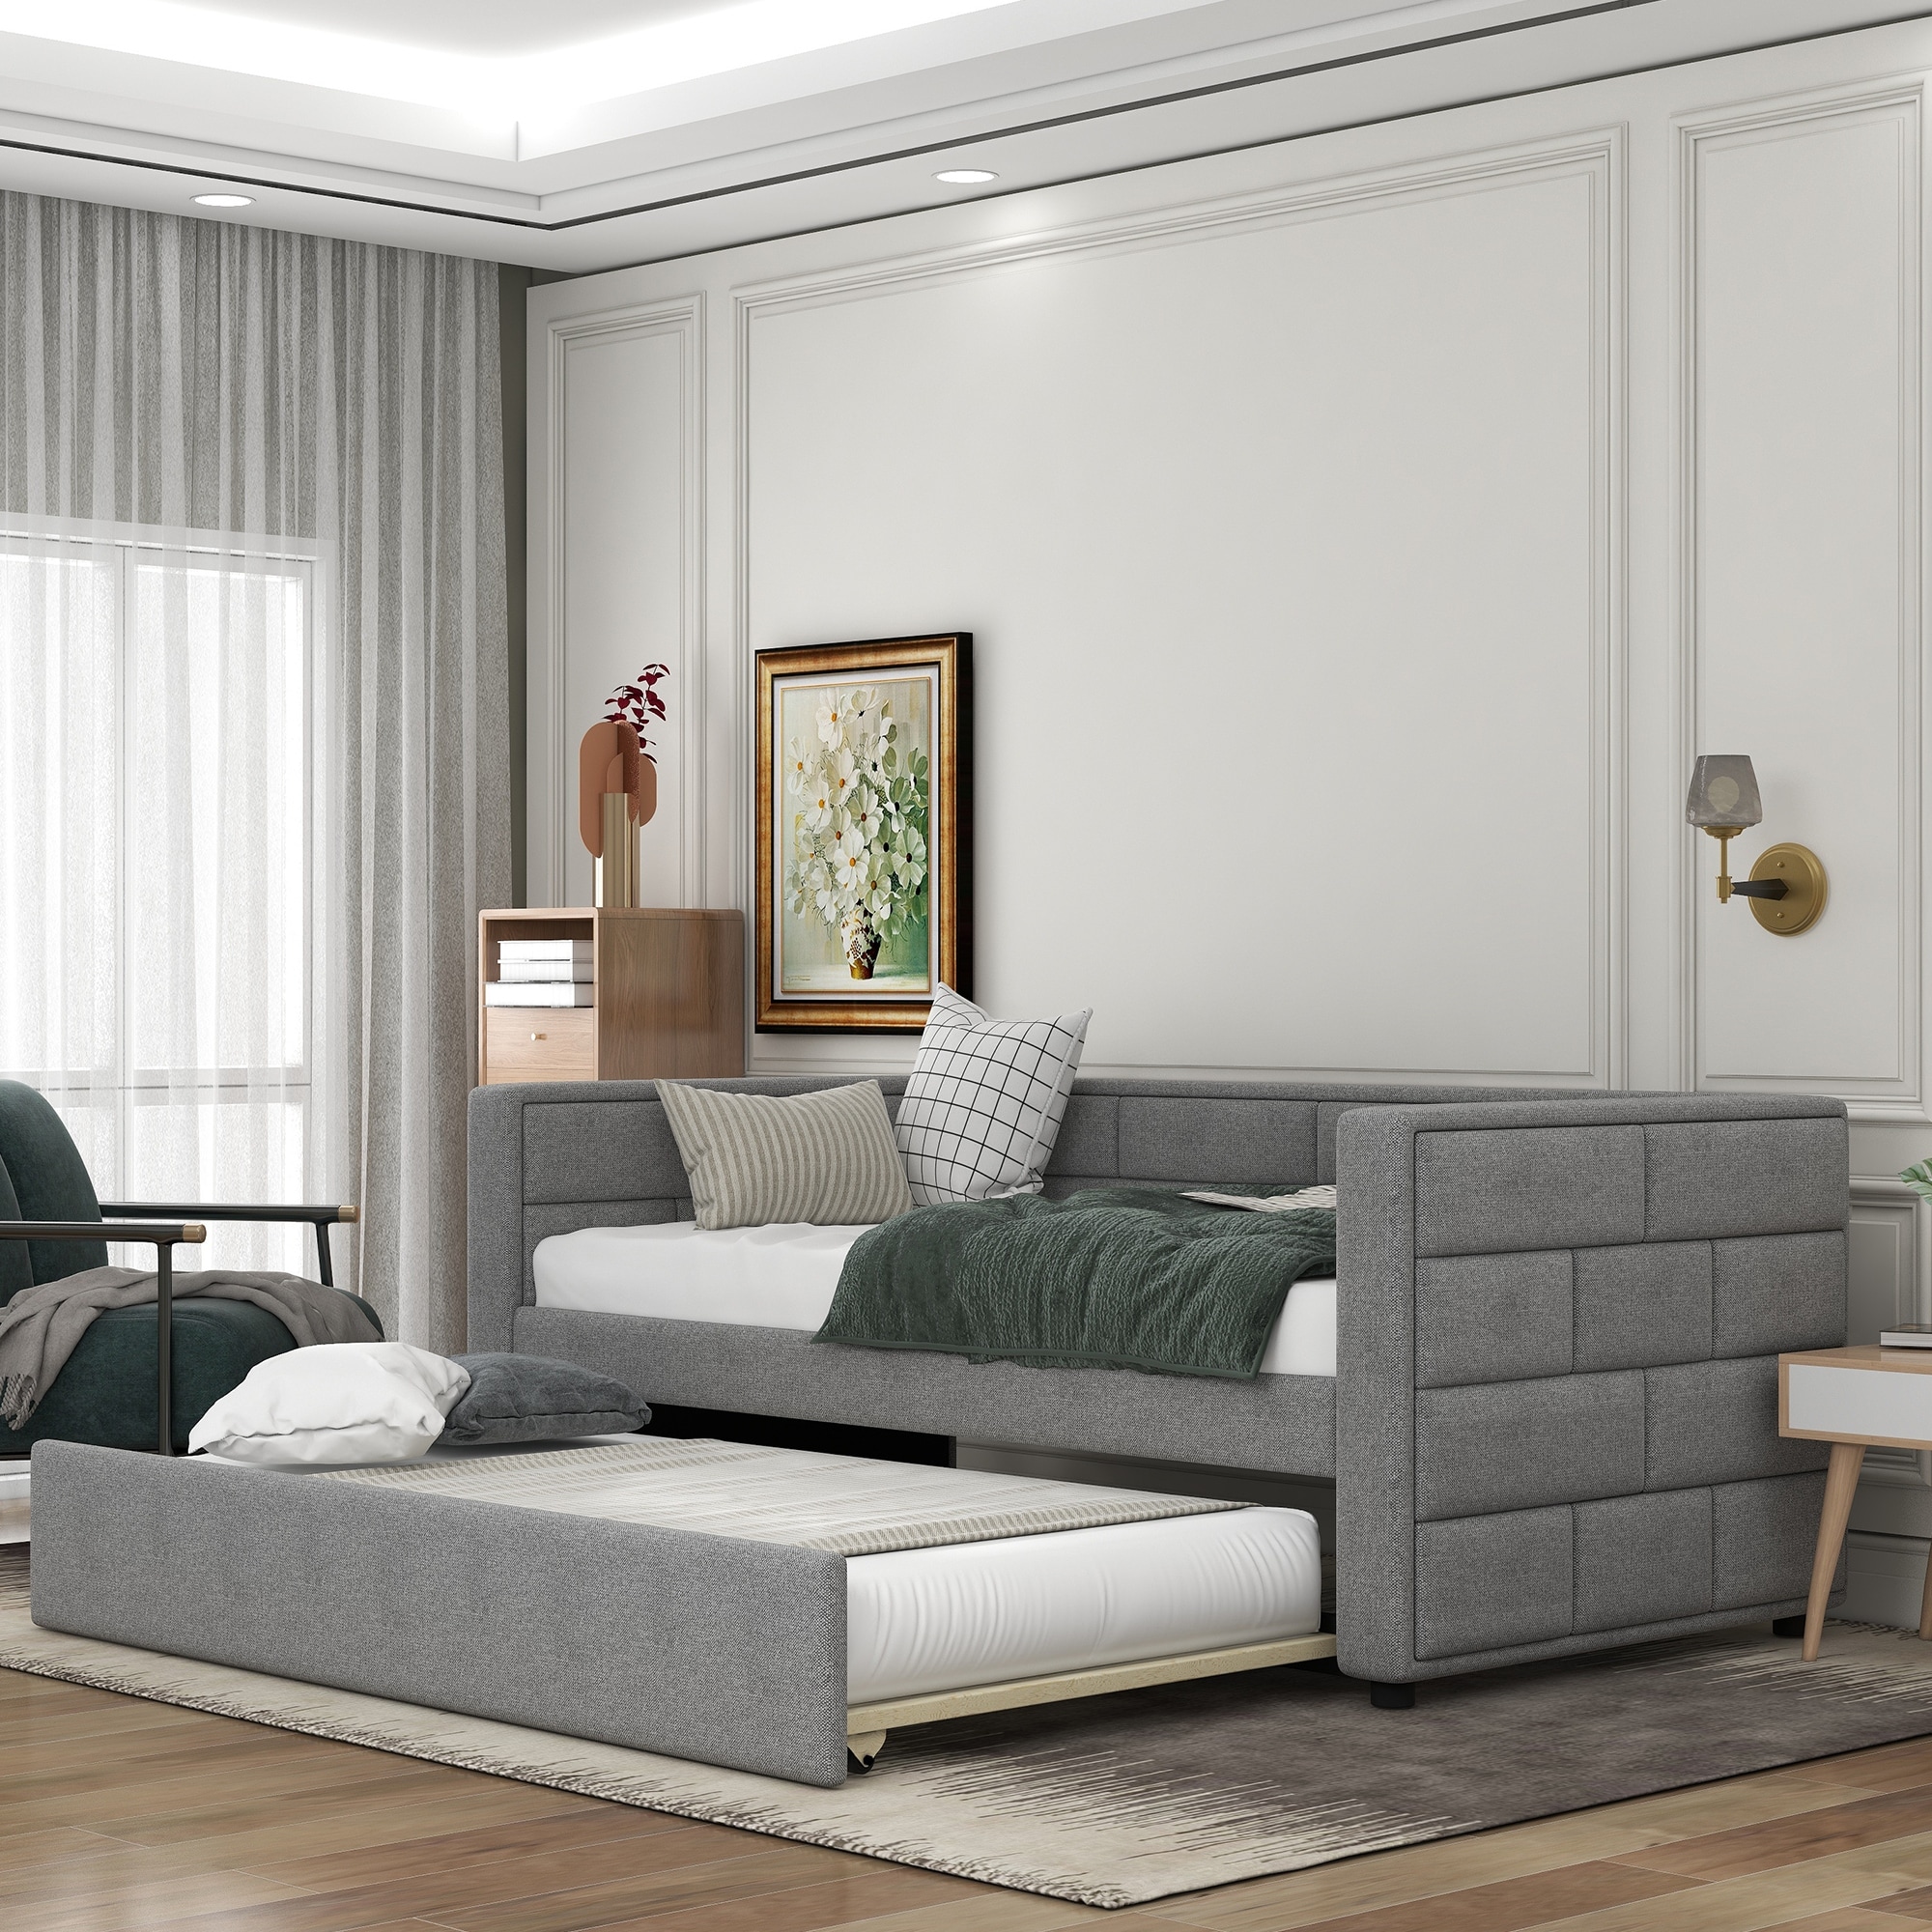 envelop Sandalen Voorkomen Roller And Upholstered Double Sofa Bed, Elegant Design Adds A Spark Of  Modern And Timeless Style To Any Room - Overstock - 36026897